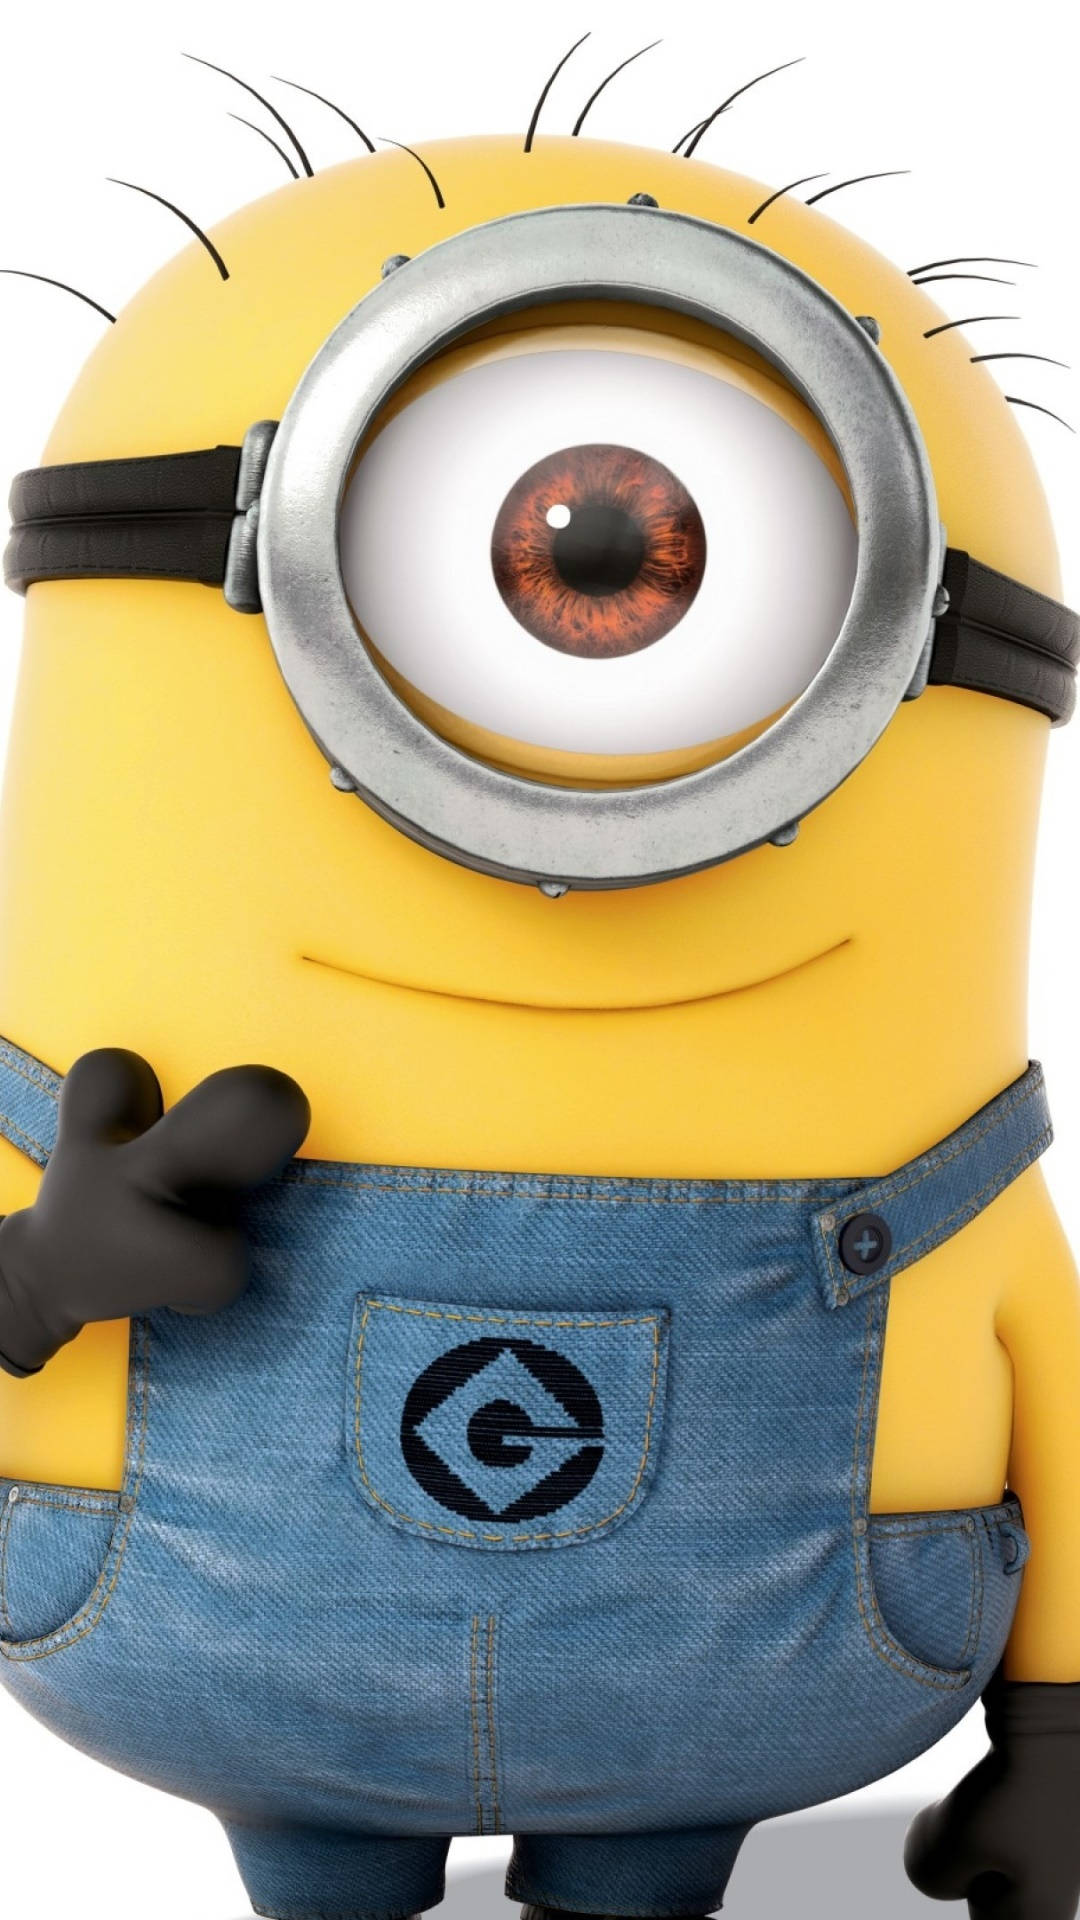 Music from my youth has been Minion-ized! 